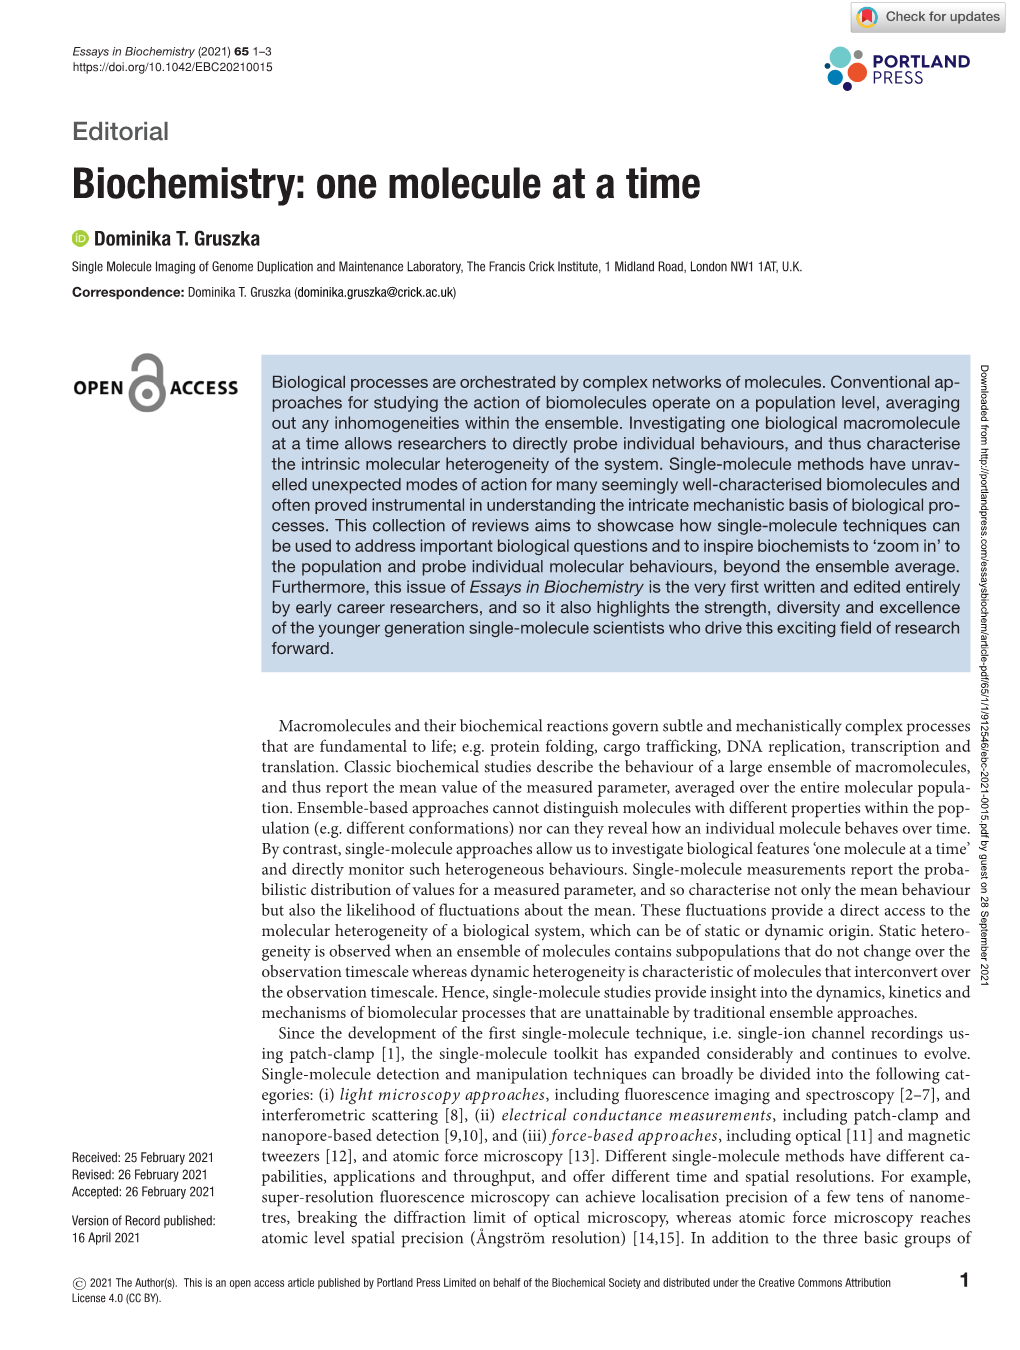 Biochemistry: One Molecule at a Time